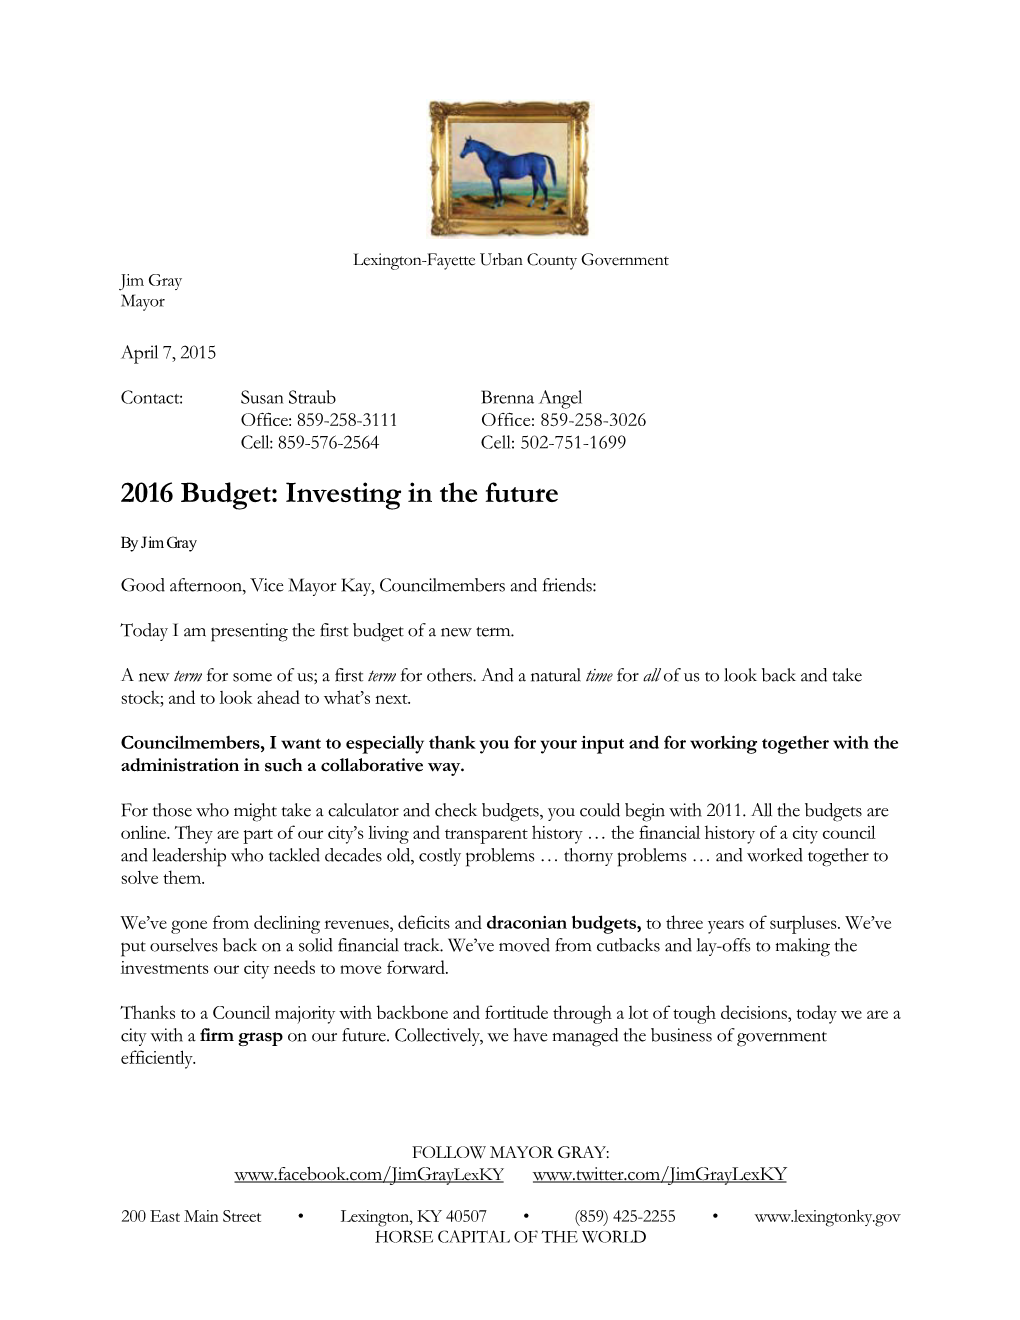 2016 Budget: Investing in the Future